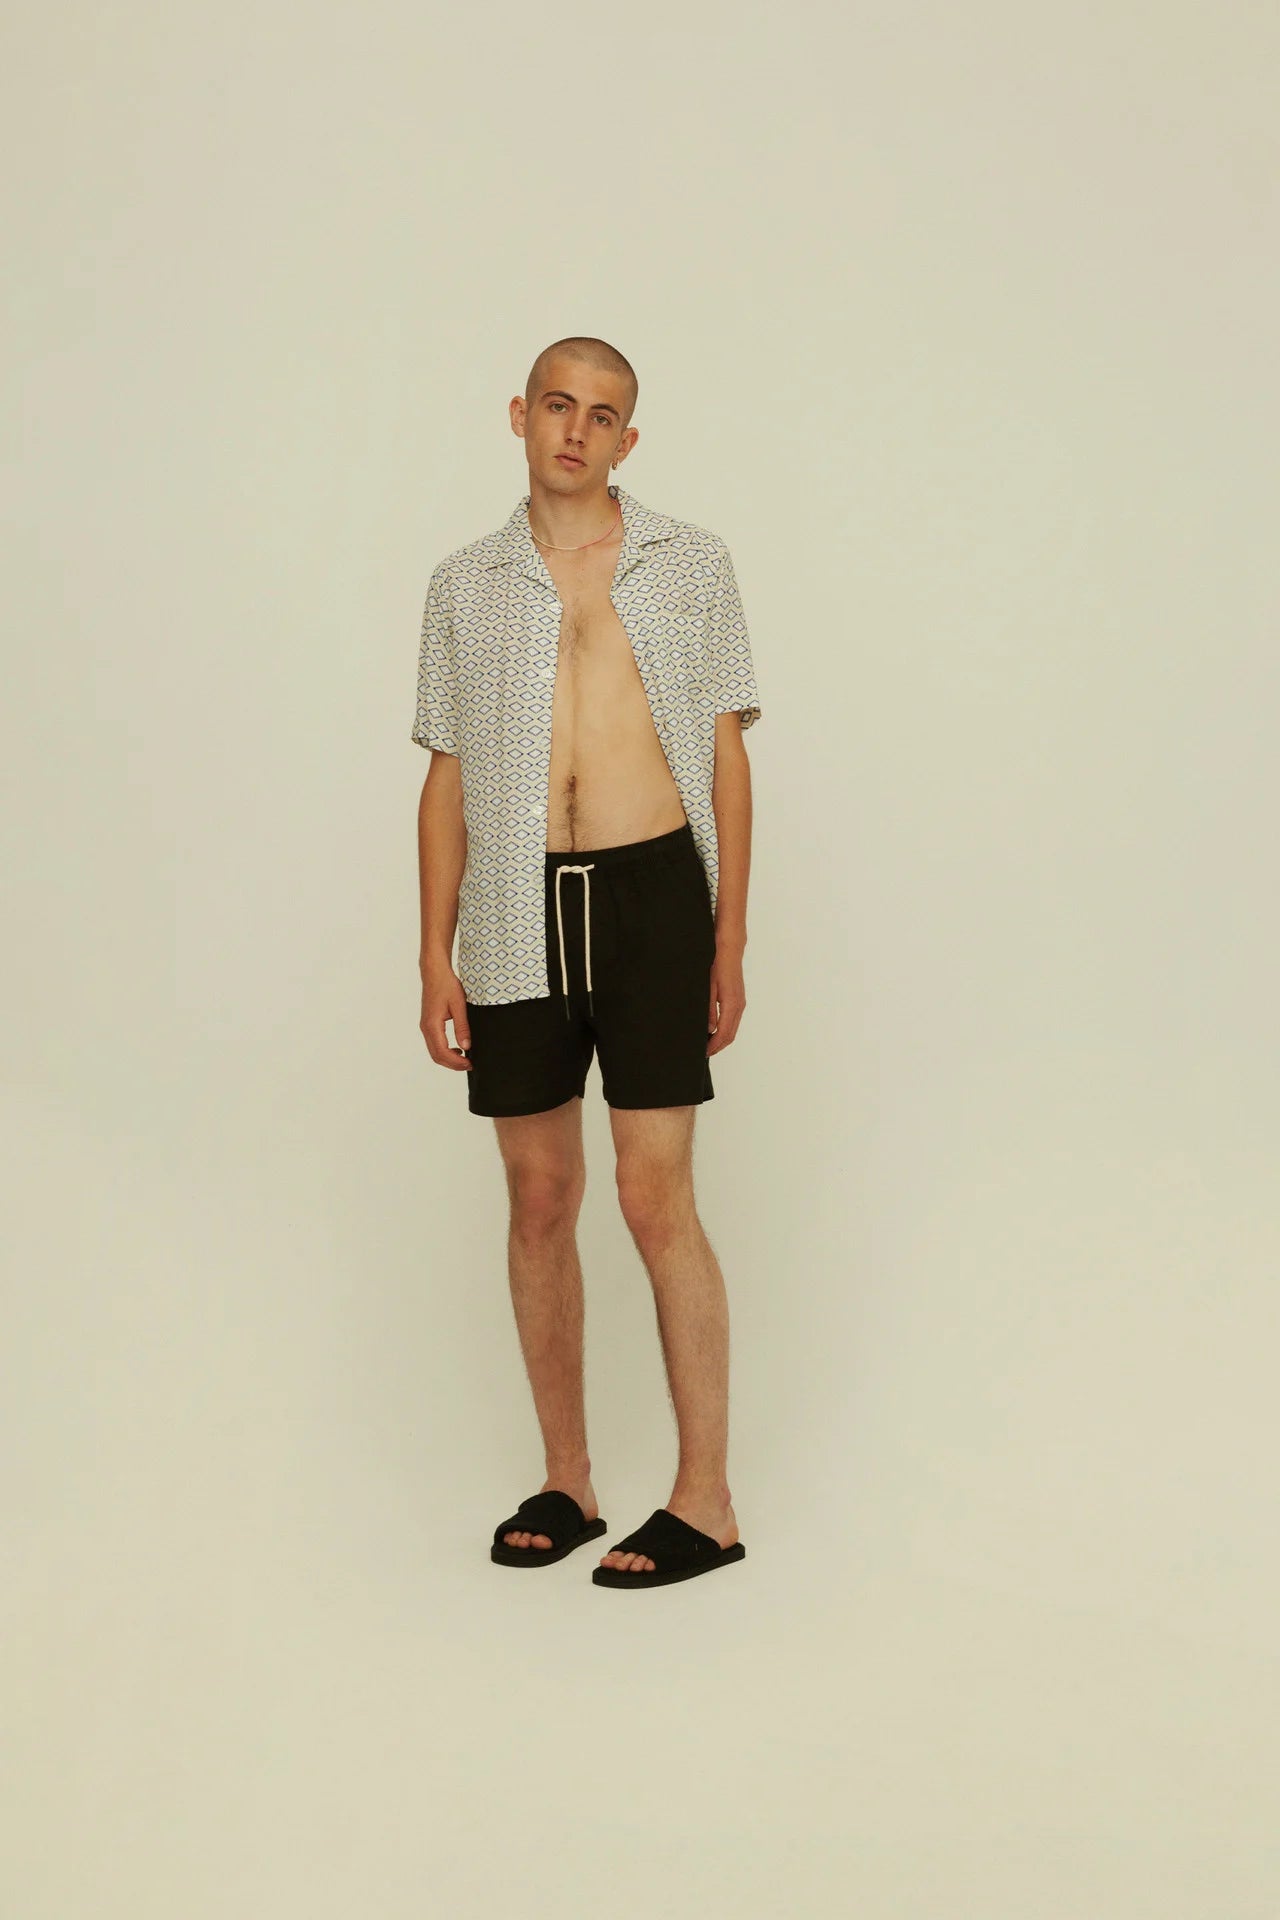 OAS Black Linen Shorts on-body shot from front